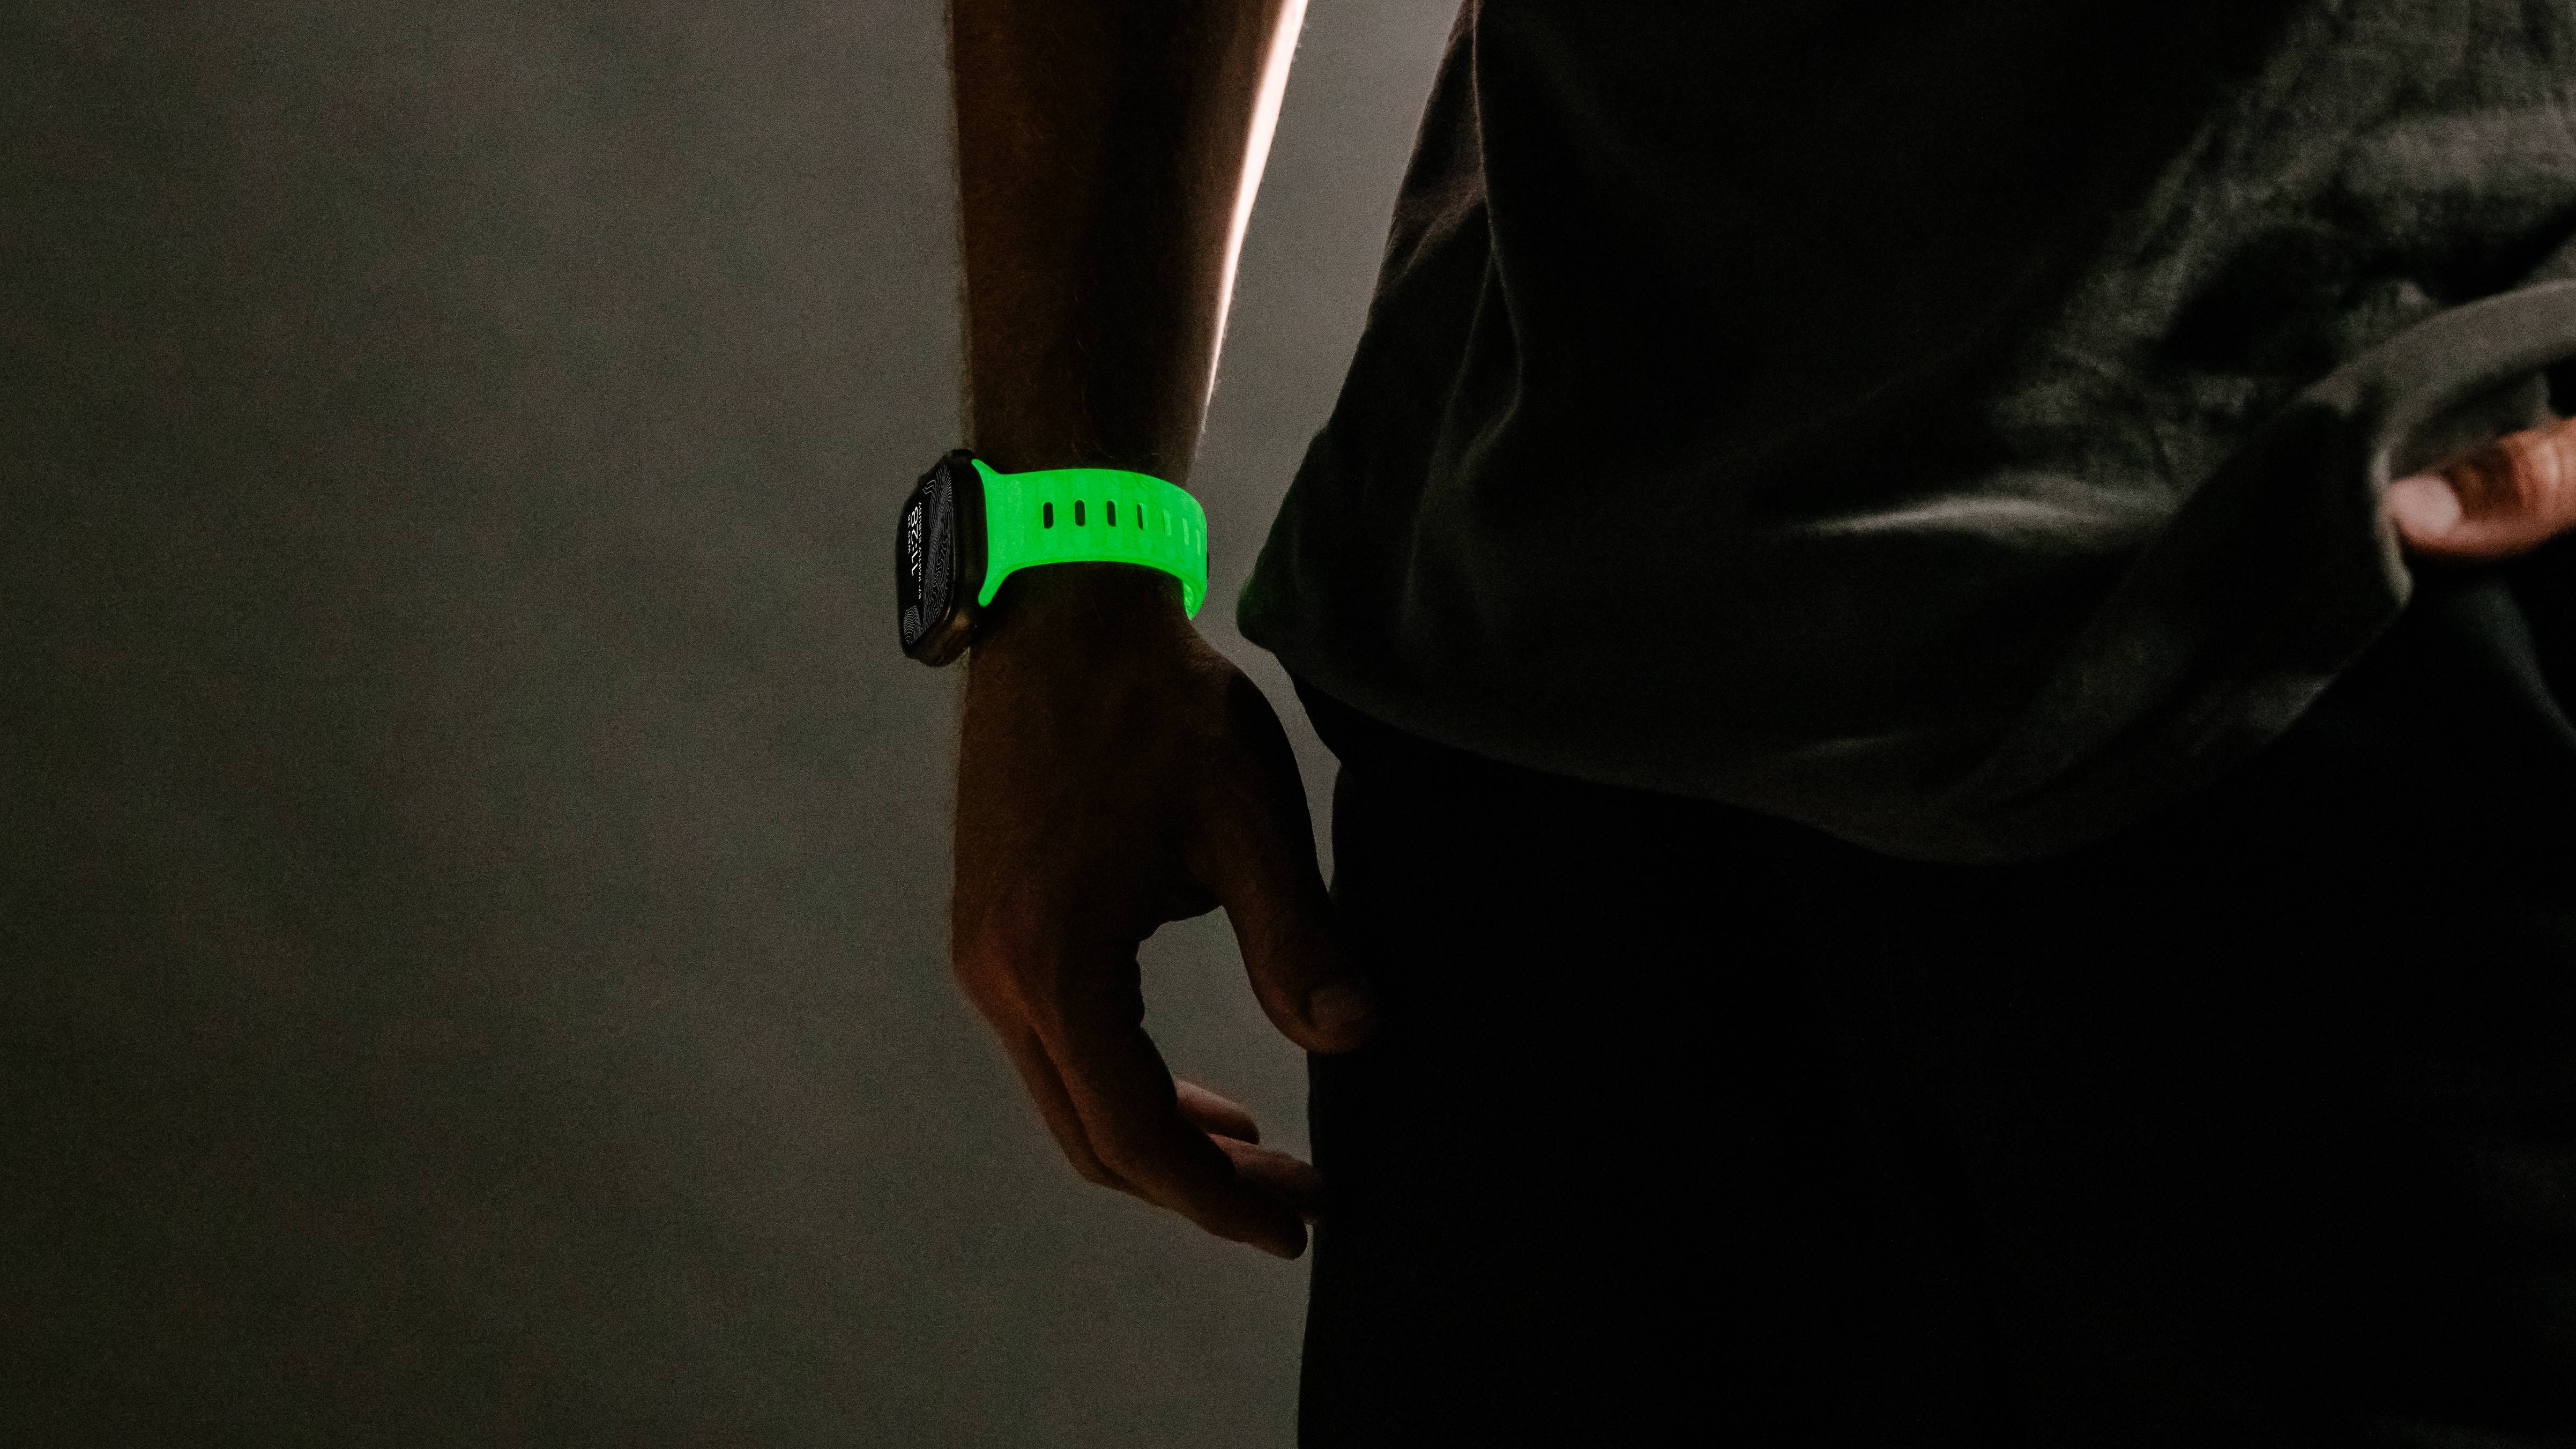 Nomad Sport Band Glow